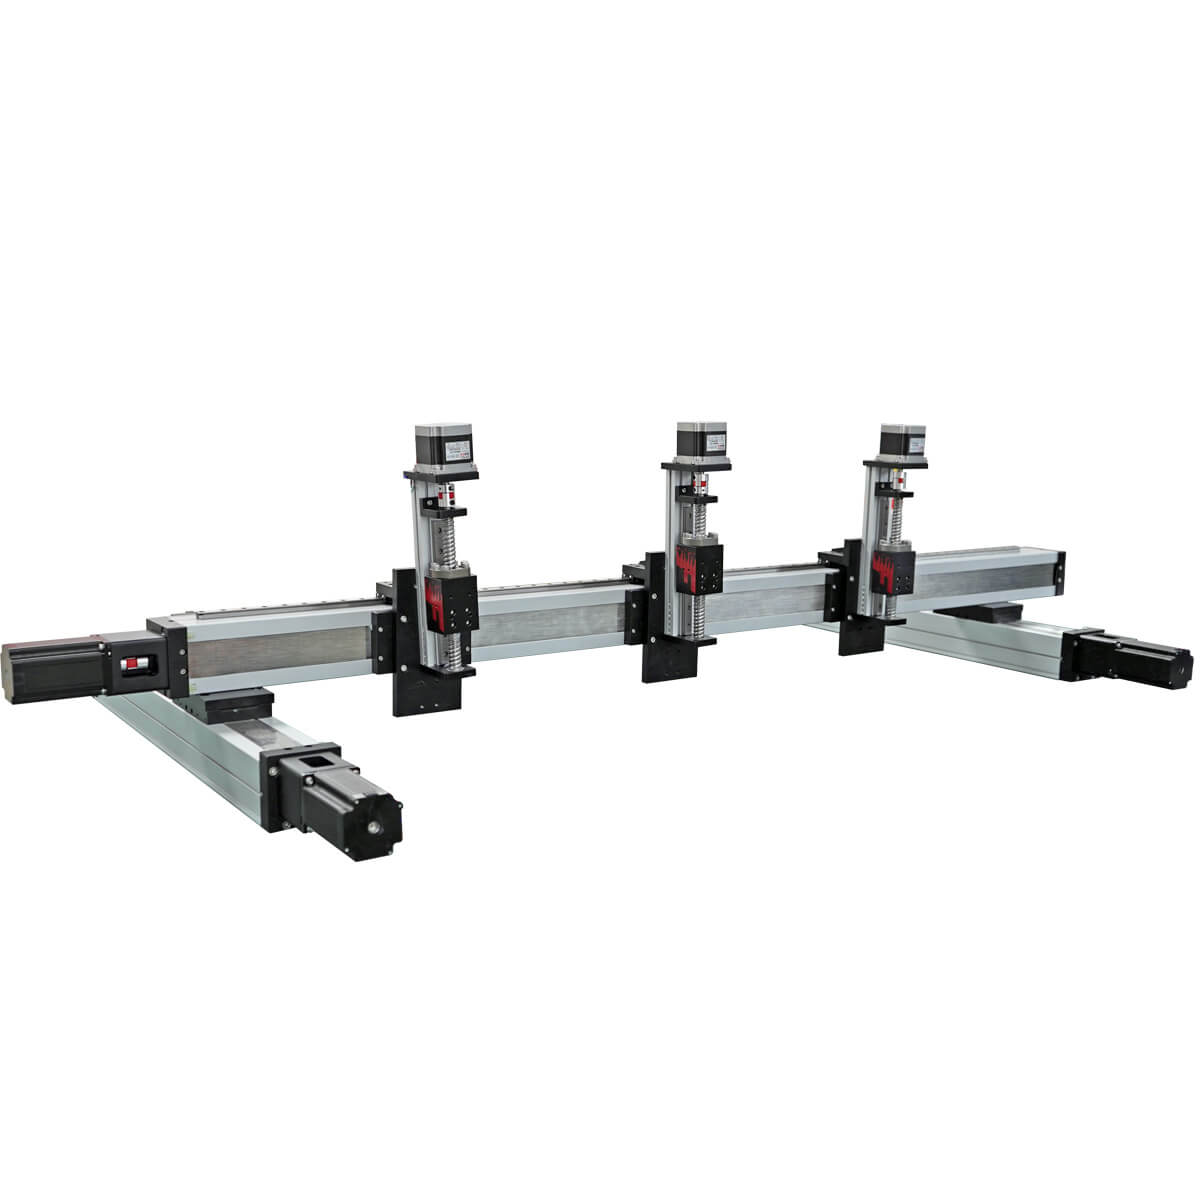 FUYU Multi-axis Ball Screw Linear Positioning Stage Synchronous XYZ Gantry Table